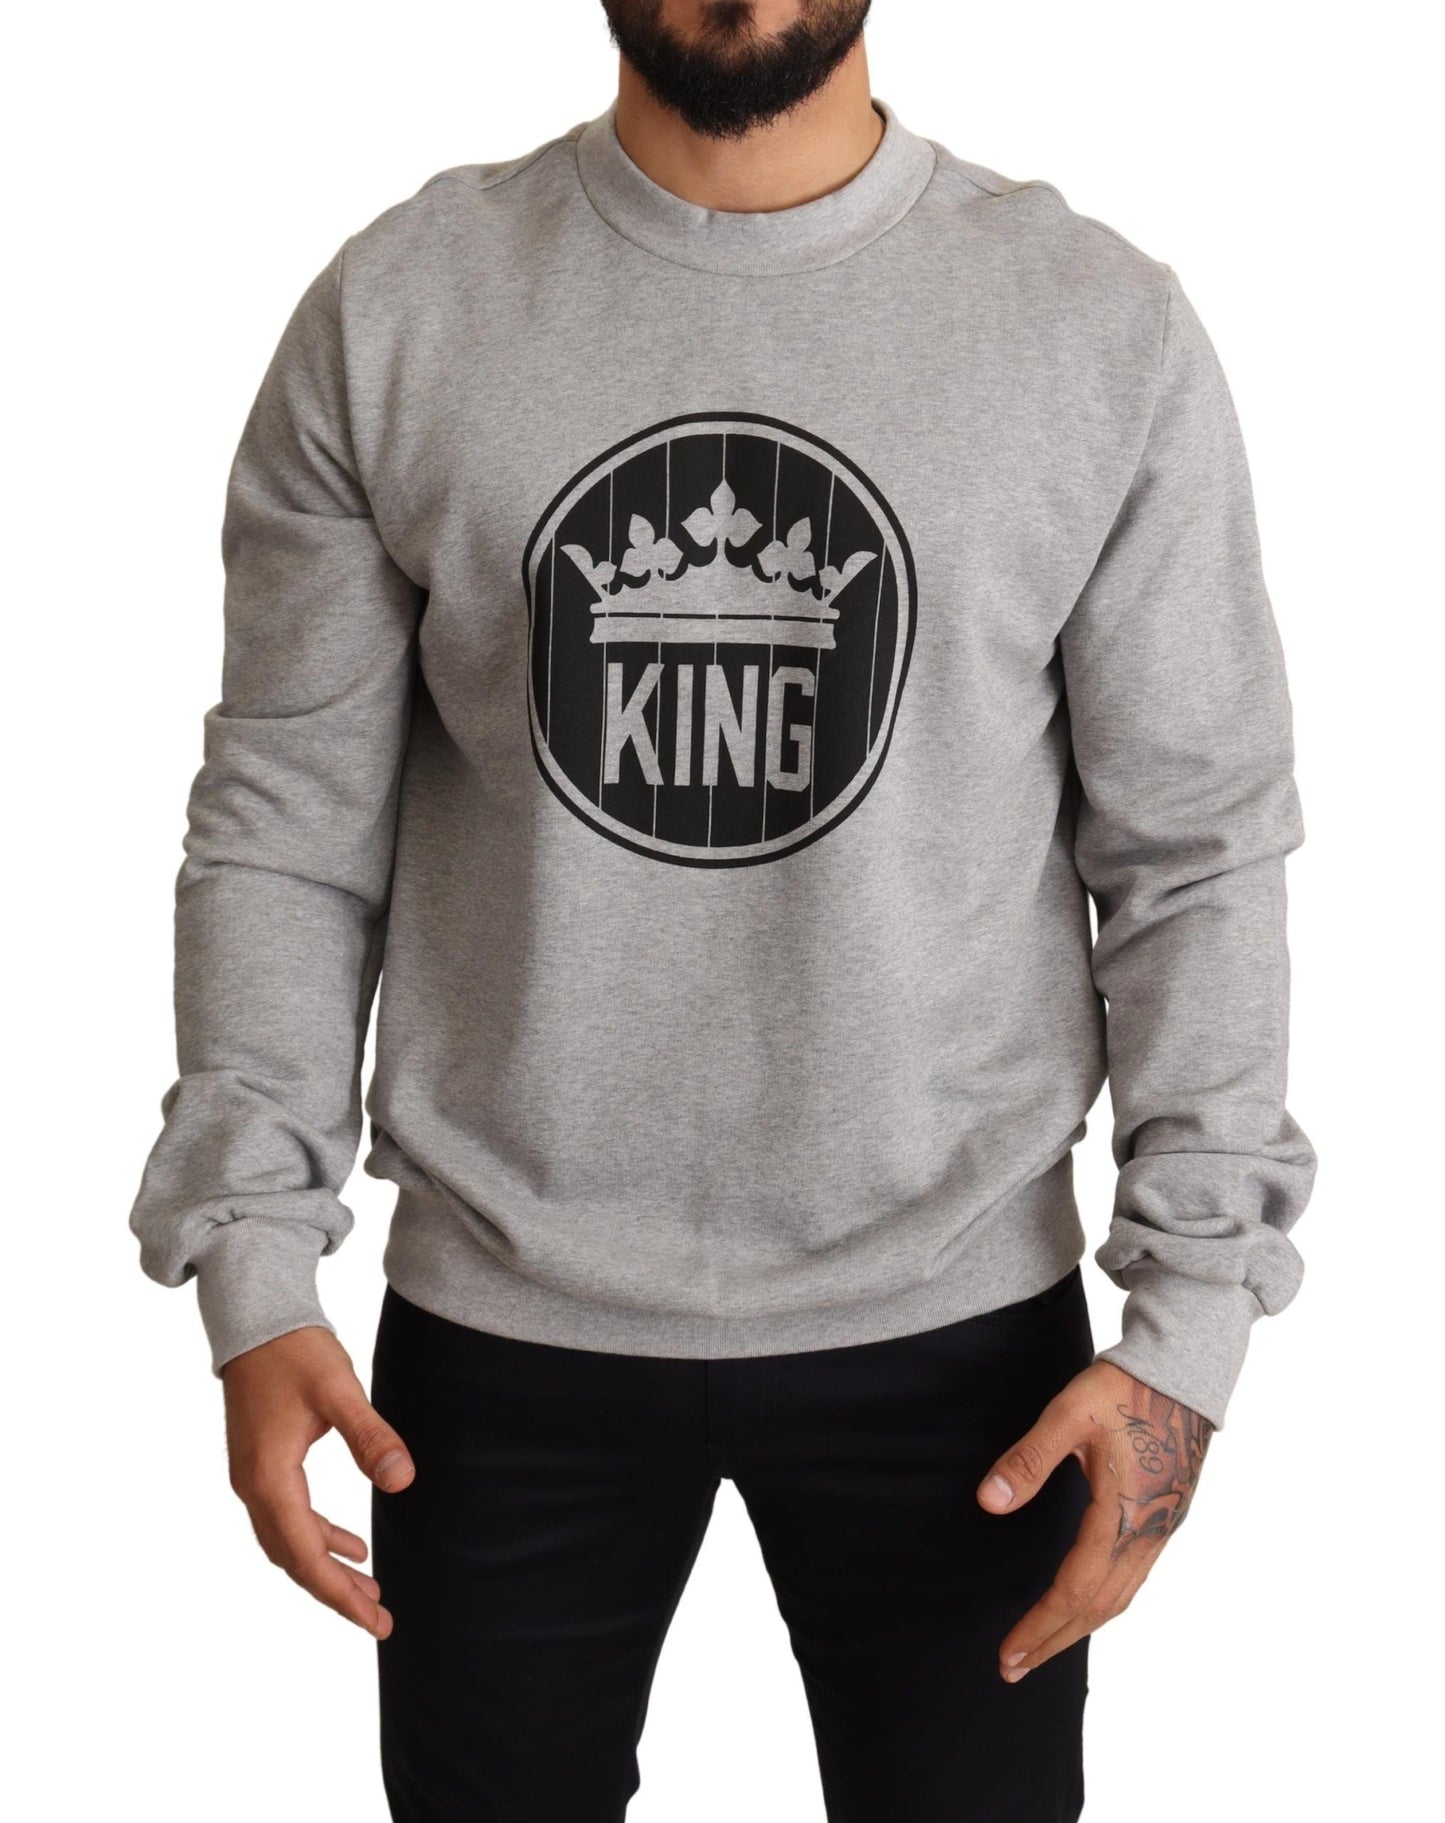 Dolce & Gabbana Regal Crown Cotton Sweater - Sophisticated Men's Gray